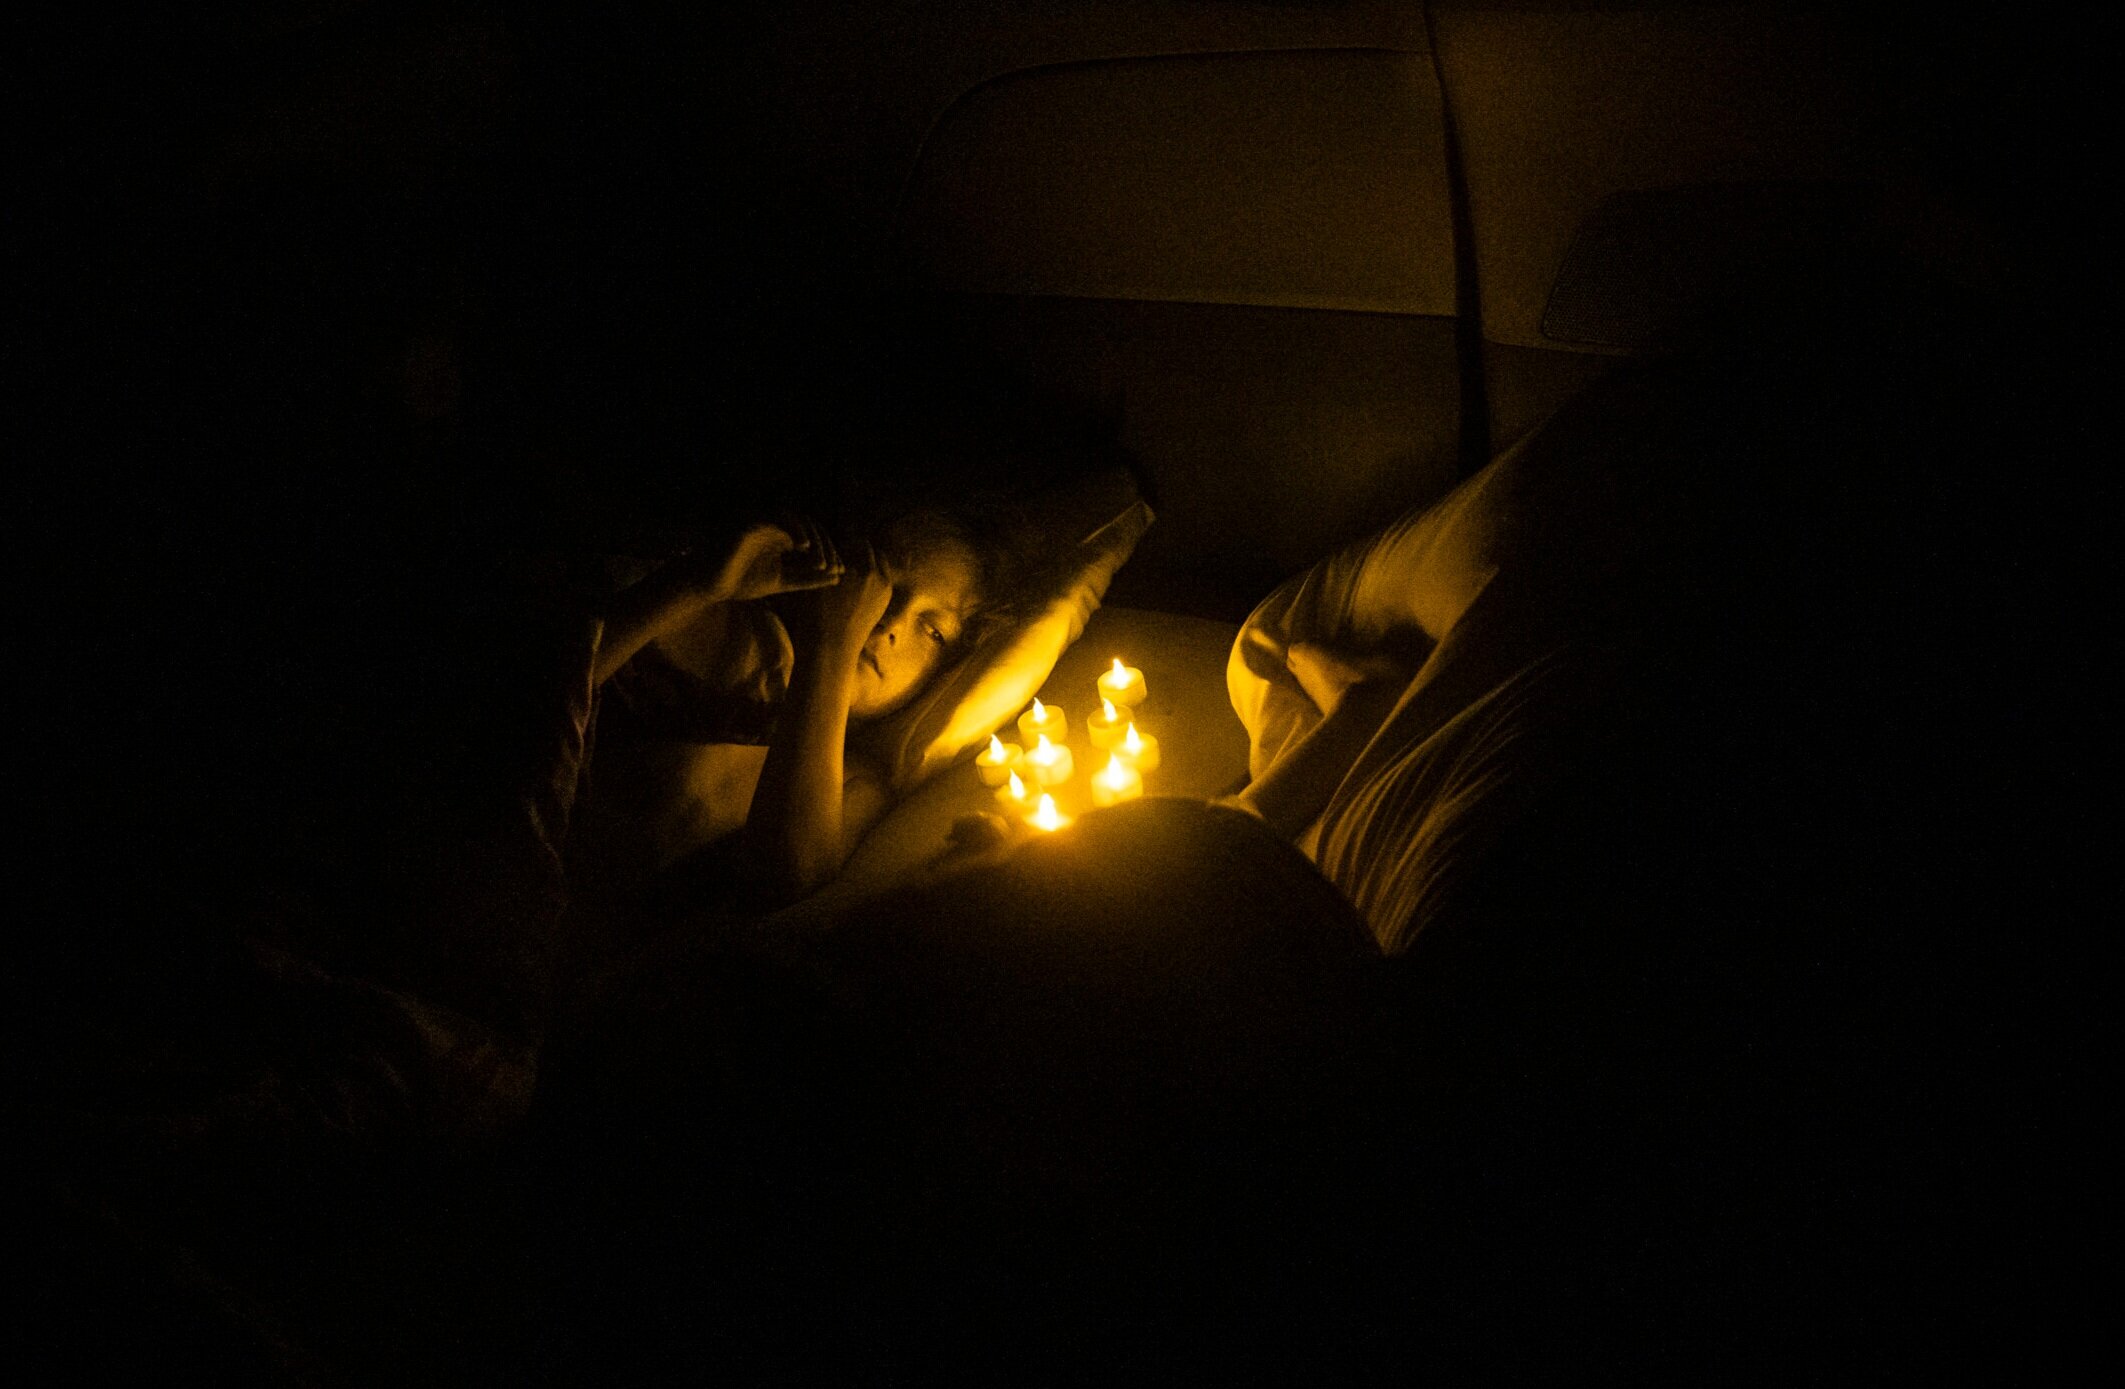 Evan Lupien watches as battery operated tea lights flicker while he drifts off to sleep. Curled up next to his two siblings, the children spend their first night sleeping in the family's van at a camp